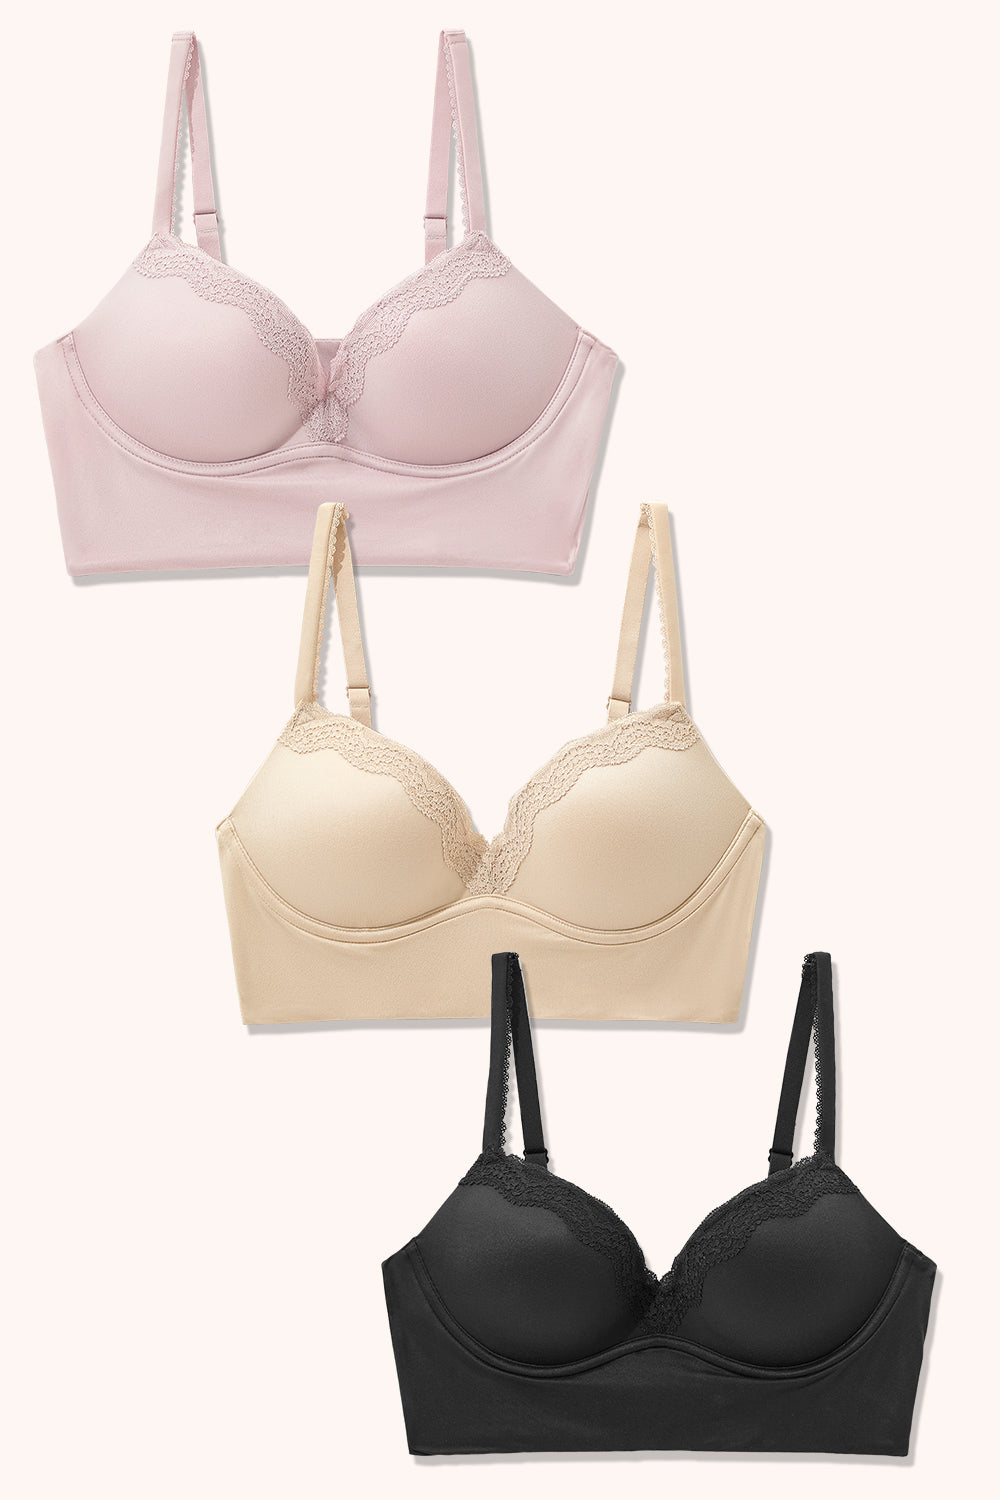 Fashion Breathtaking 3PACK Very Comfortable Bridal Bras Best Quality Push Up  Strappy N Strapless Bras @ Best Price Online